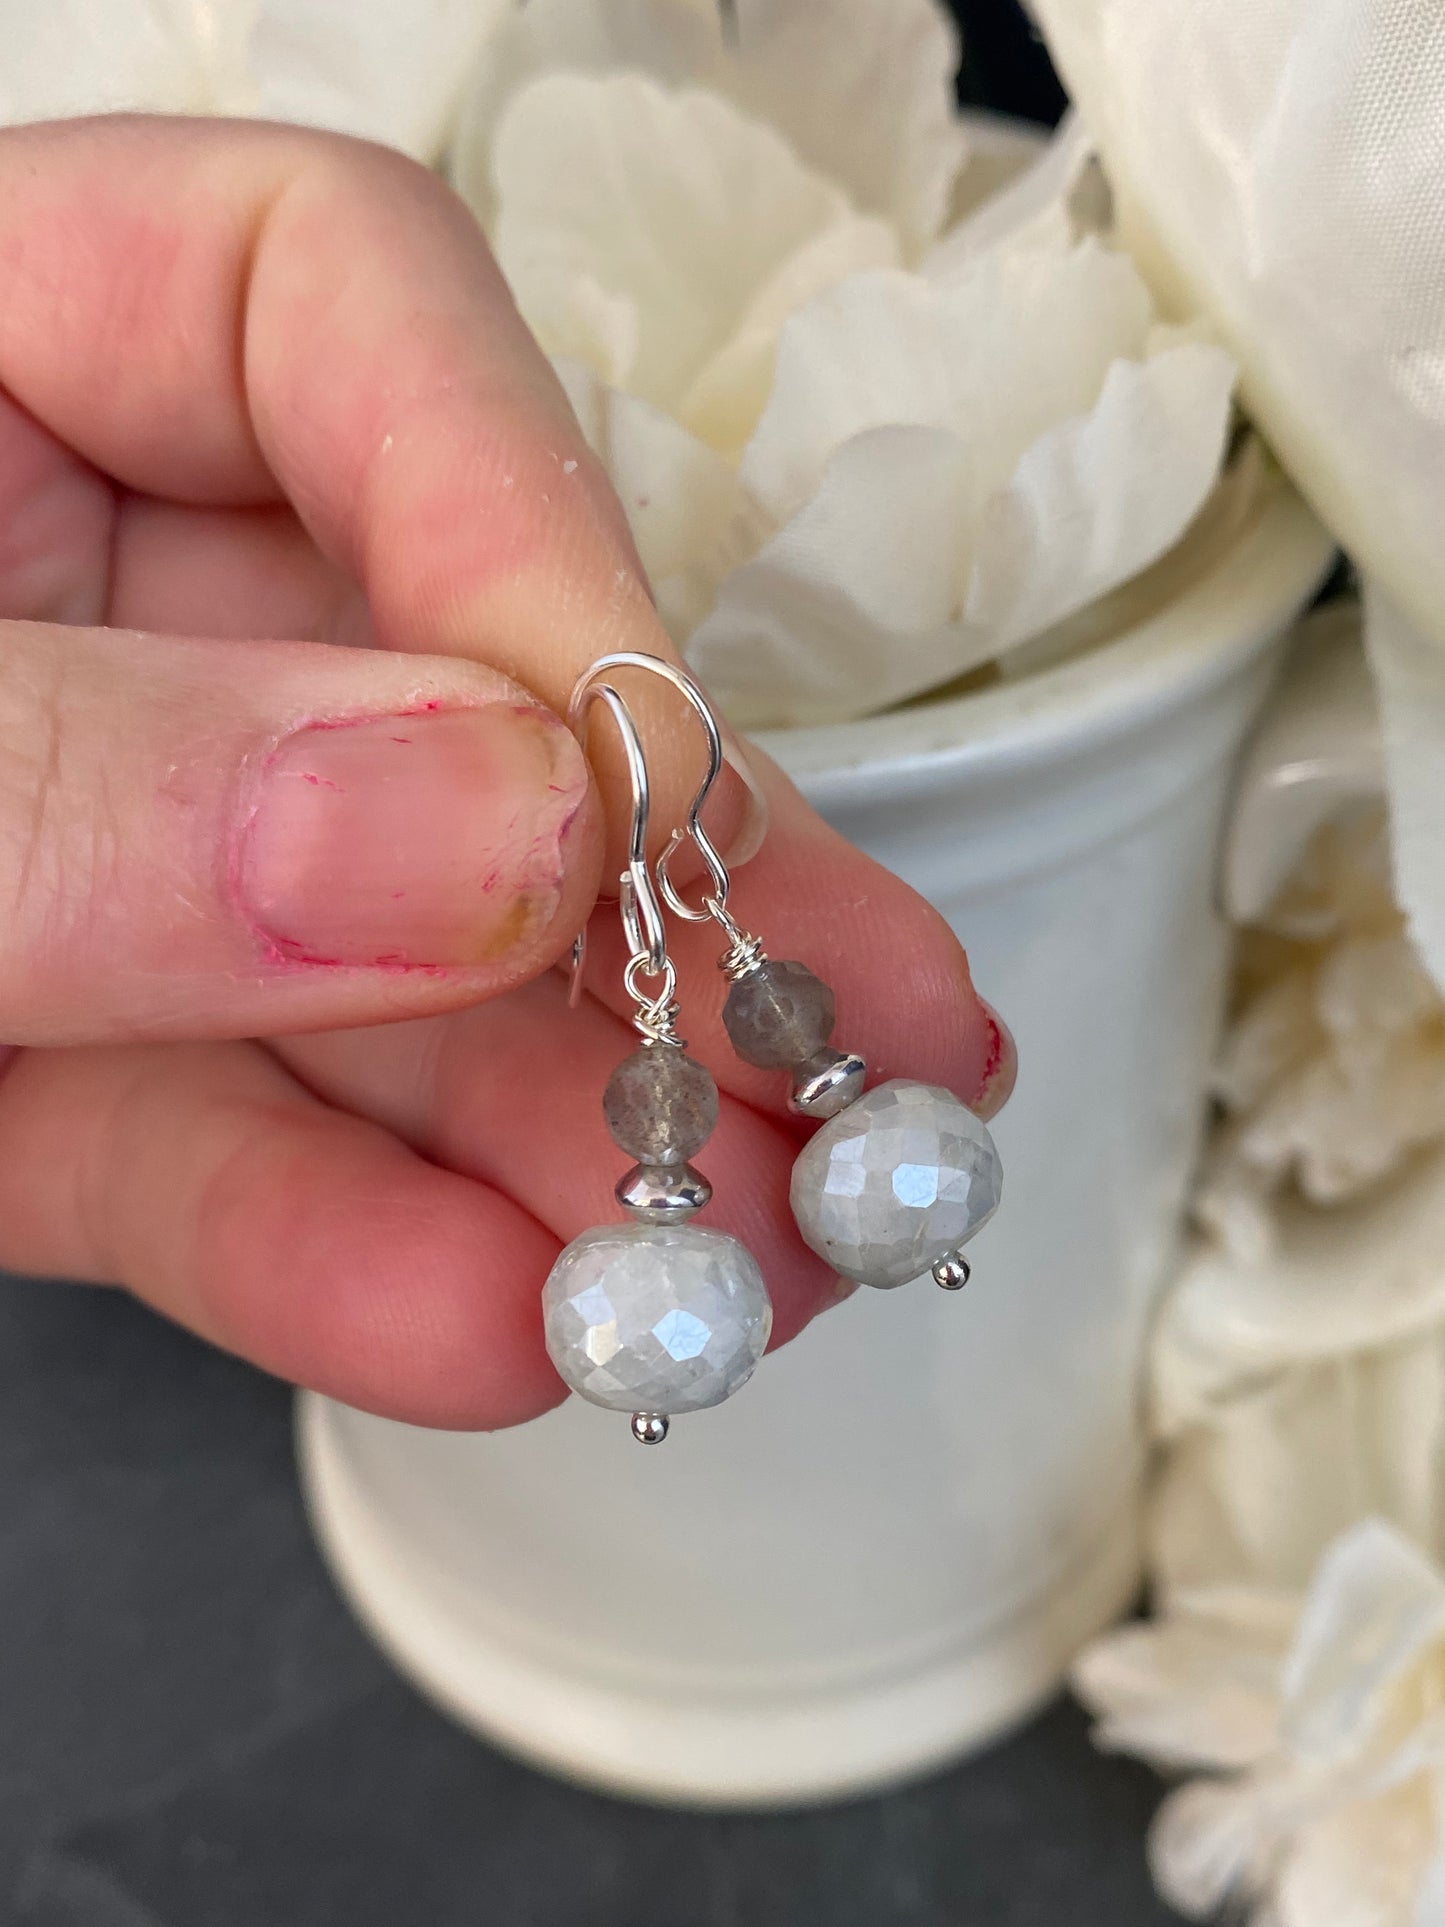 Micro faceted moonstone, labradorite stone, silver metal, earrings, jewelry.